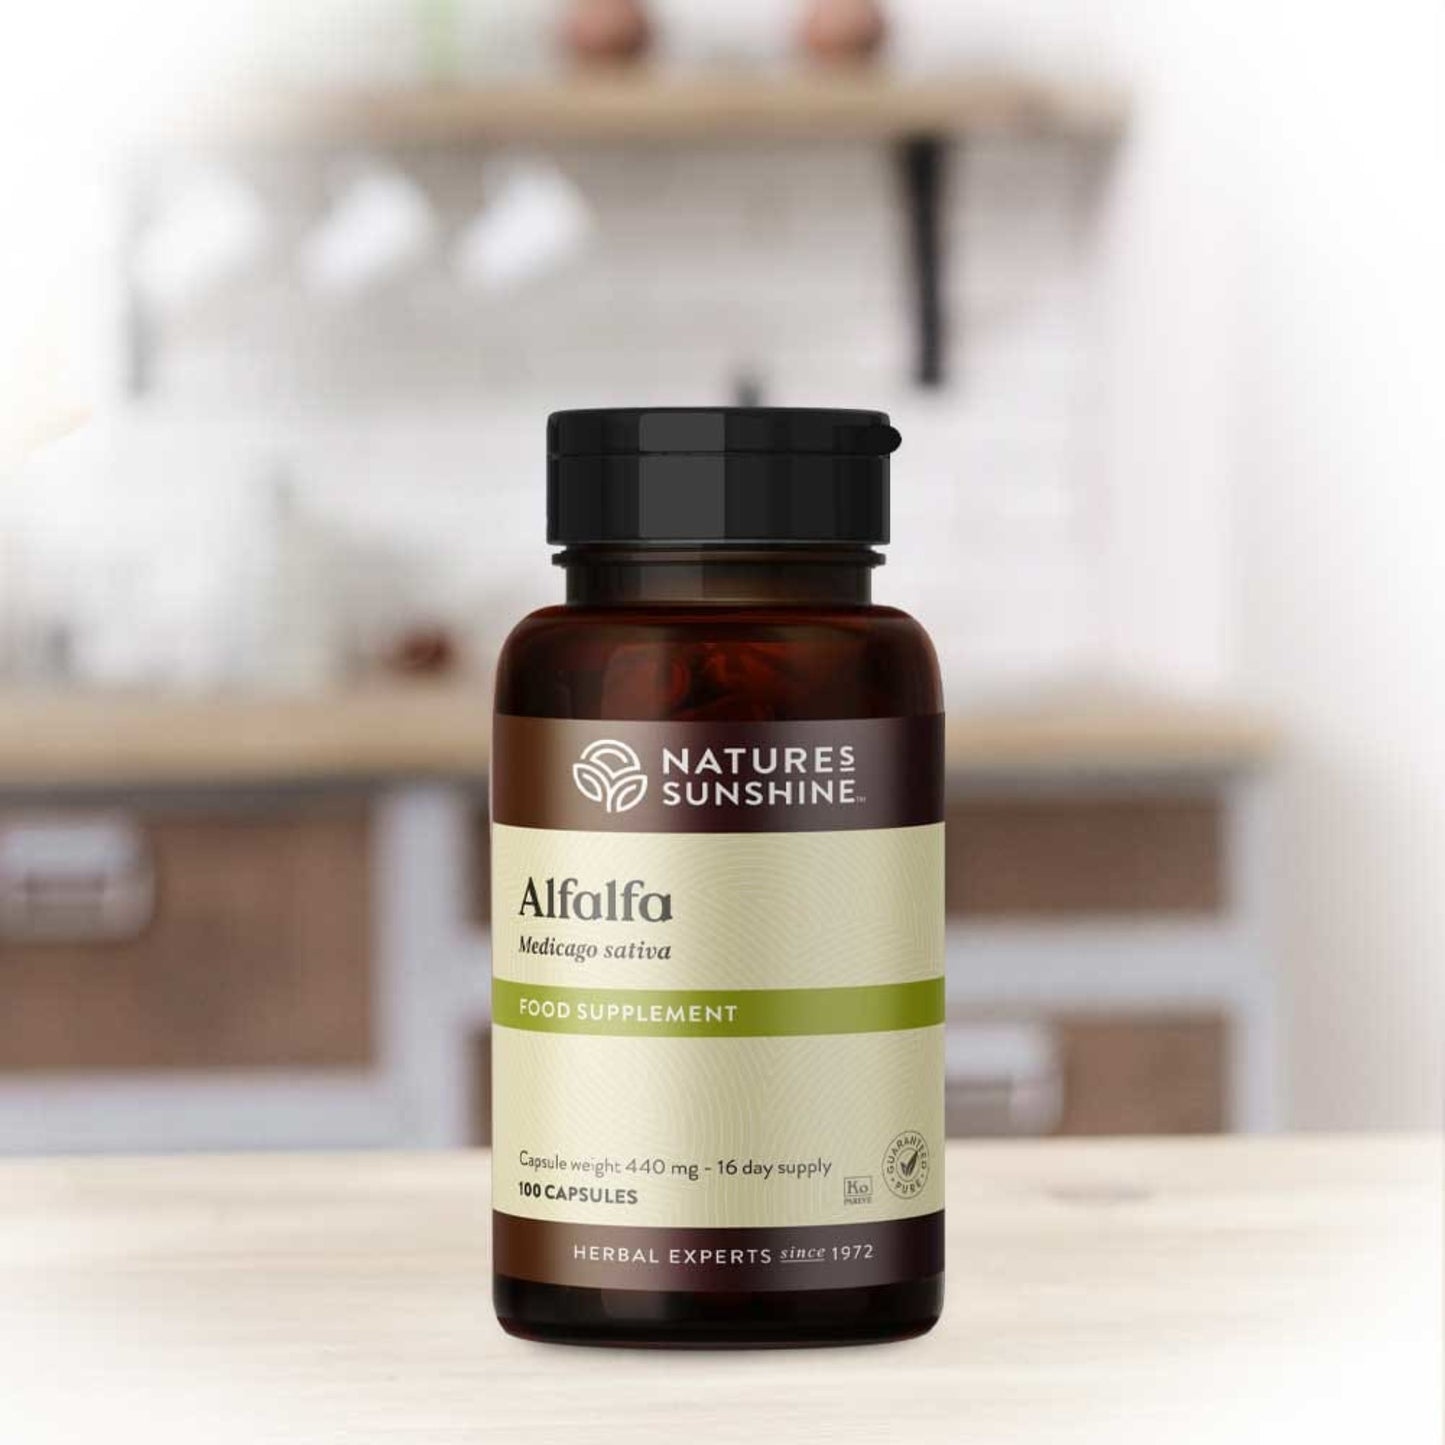 Alfalfa capsules from Nature's Sunshine shown on a kitchen table